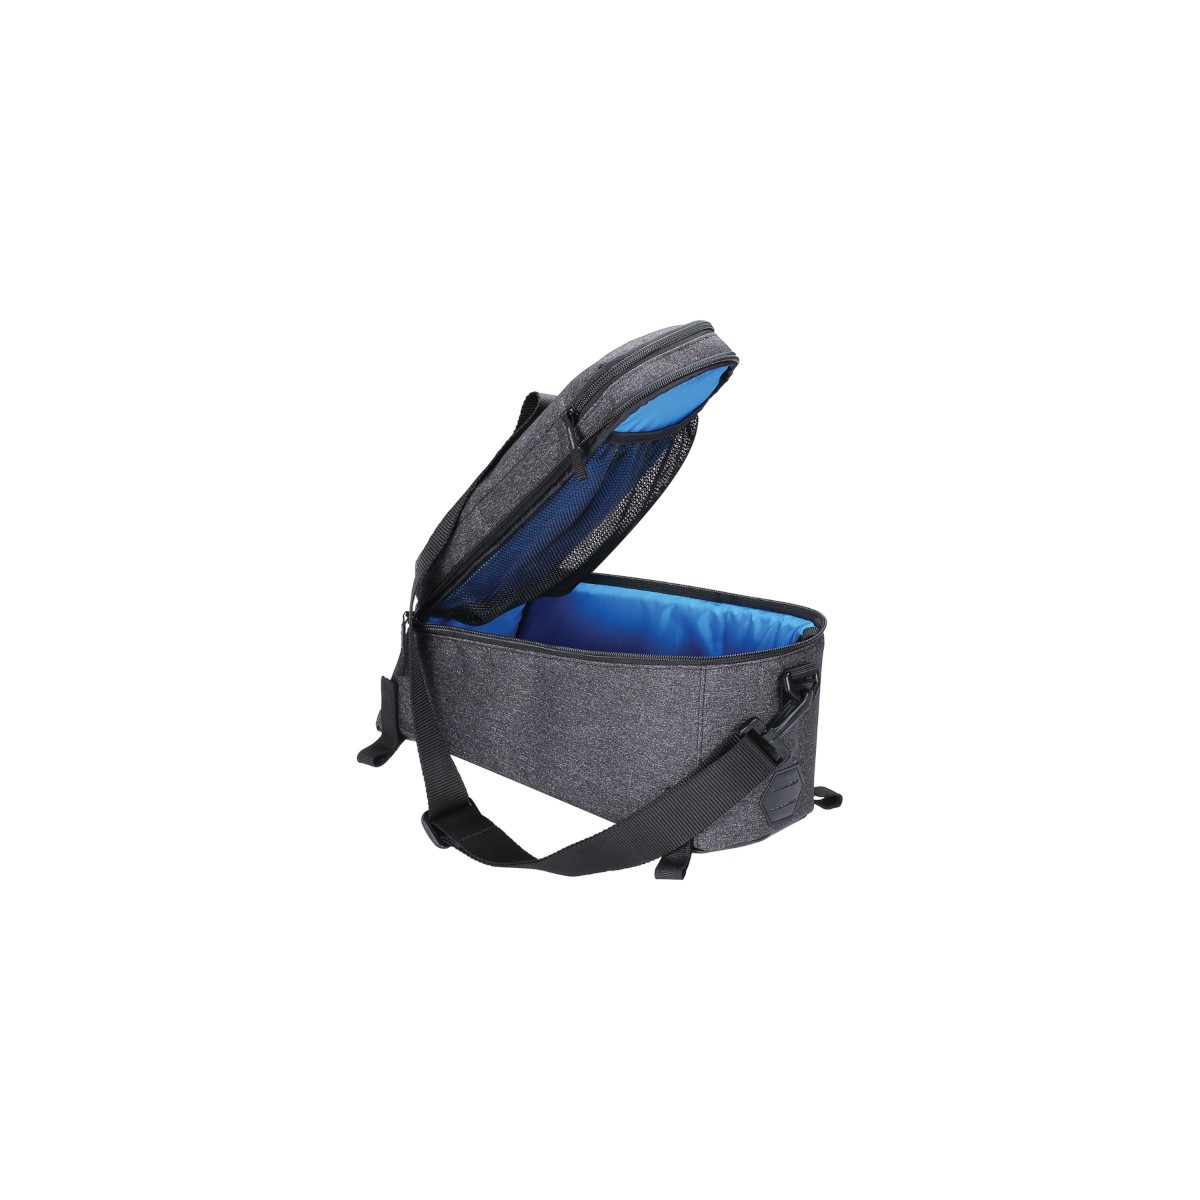 Sacoche porte bagage CarrierPack36x16x16cm - 6L